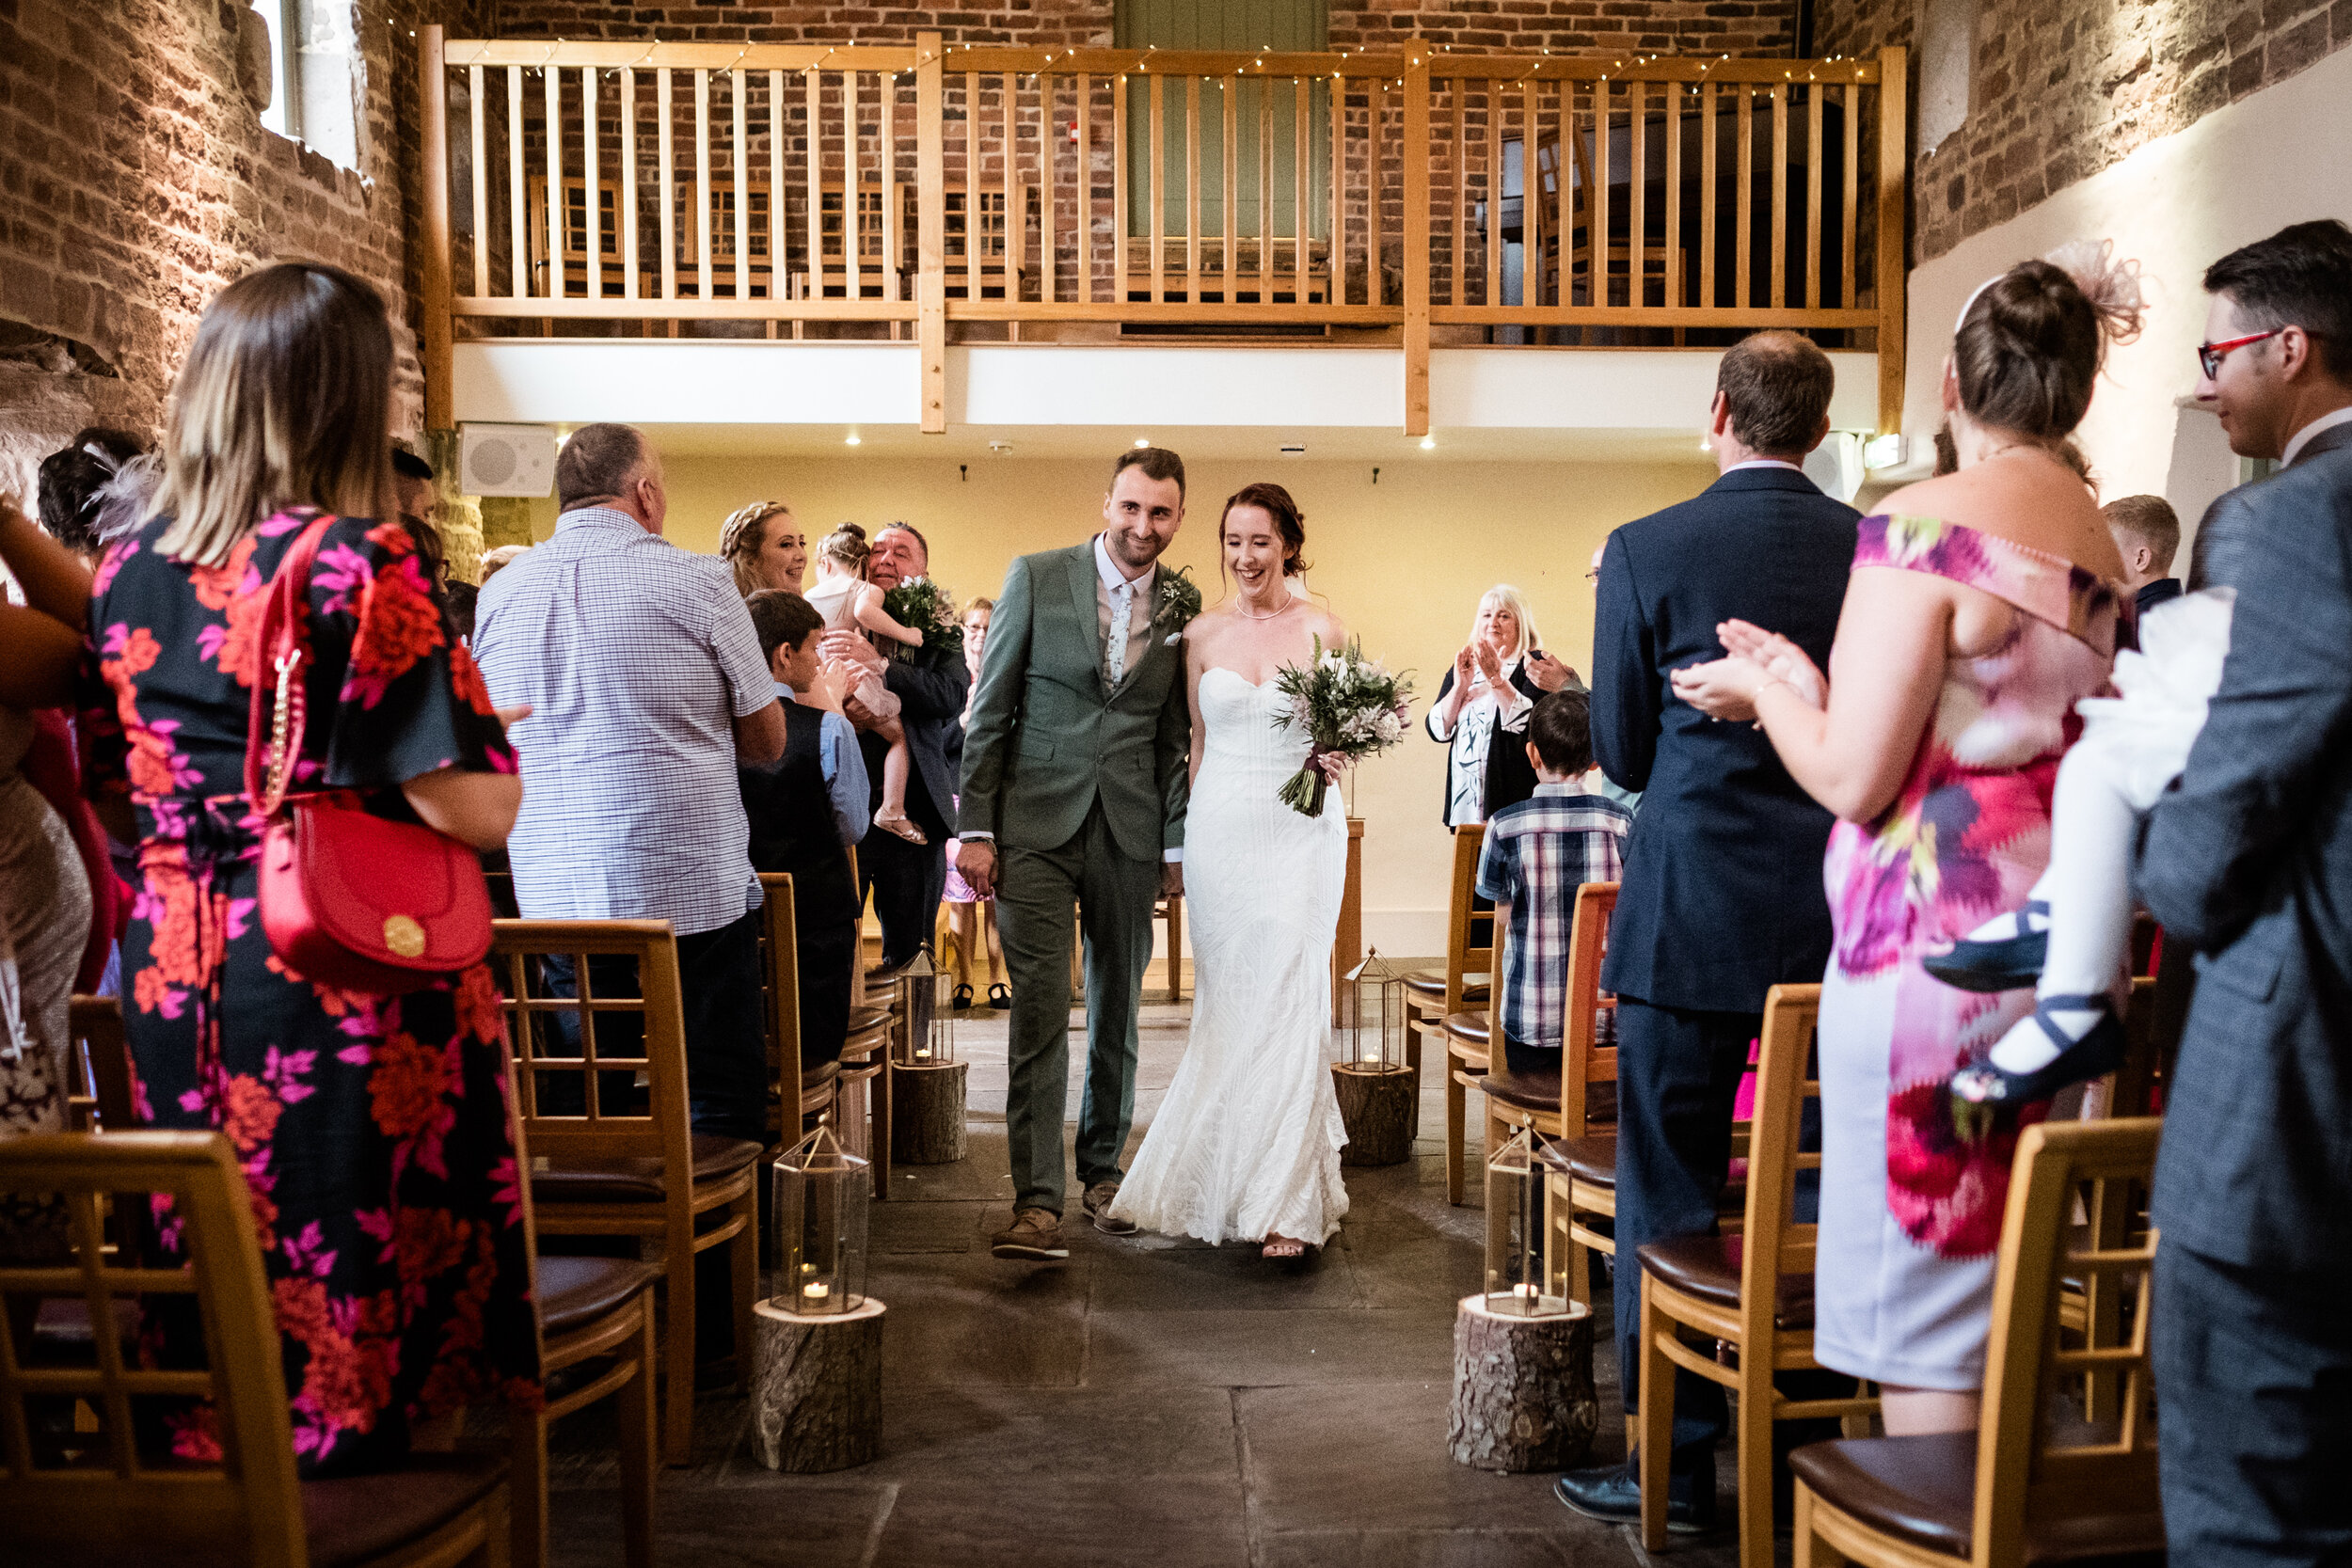 Summer Documentary Wedding Photography at The Ashes Barns, Endon, Staffordshire - Jenny Harper-31.jpg